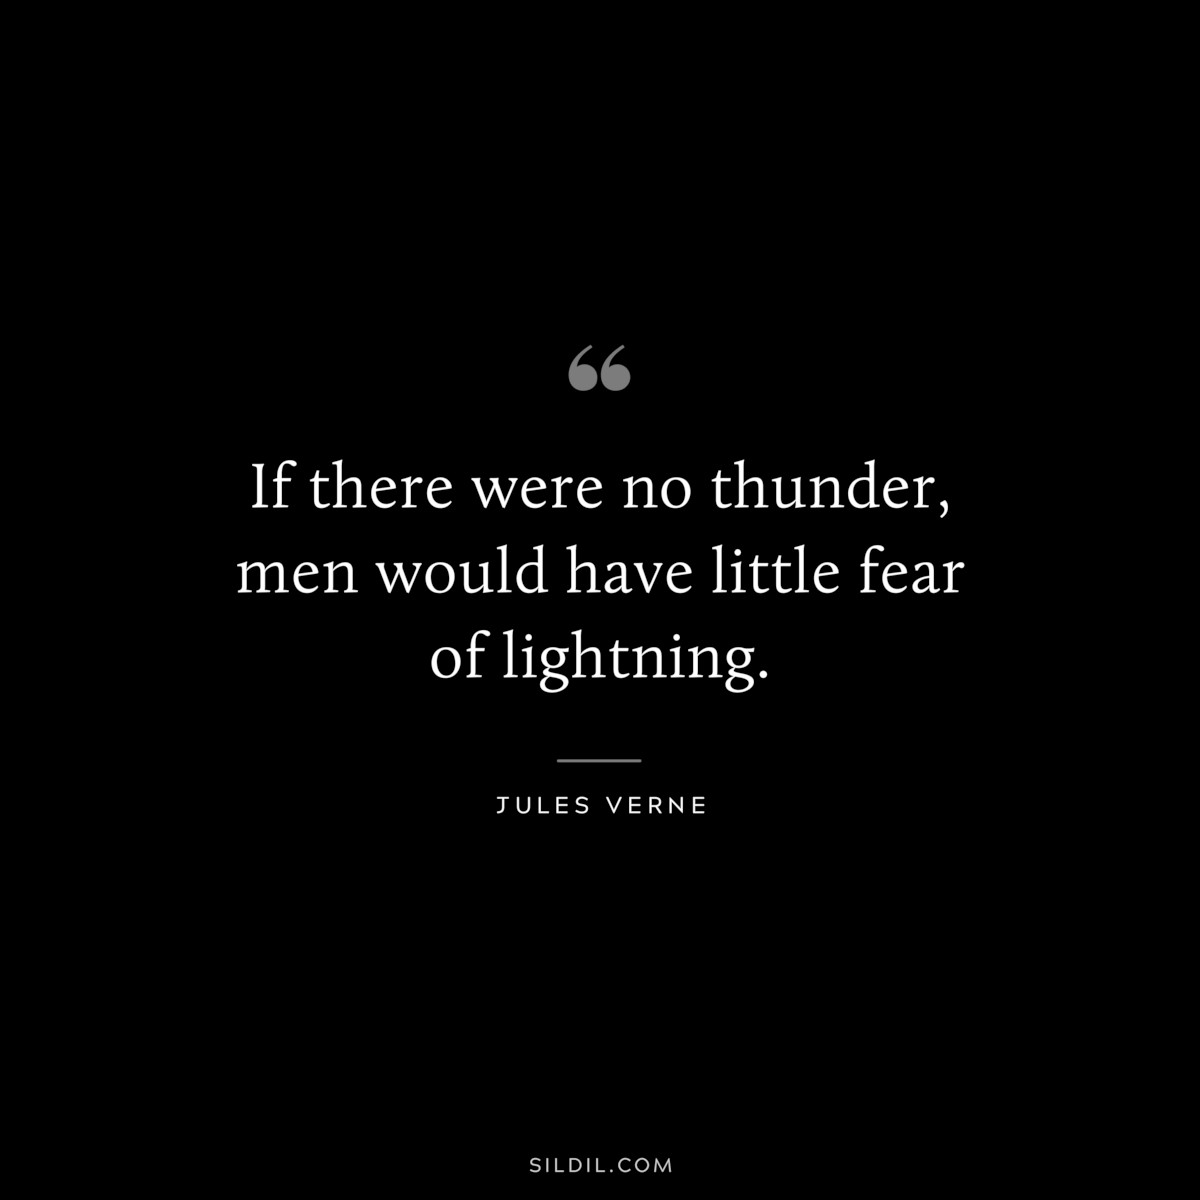 If there were no thunder, men would have little fear of lightning.